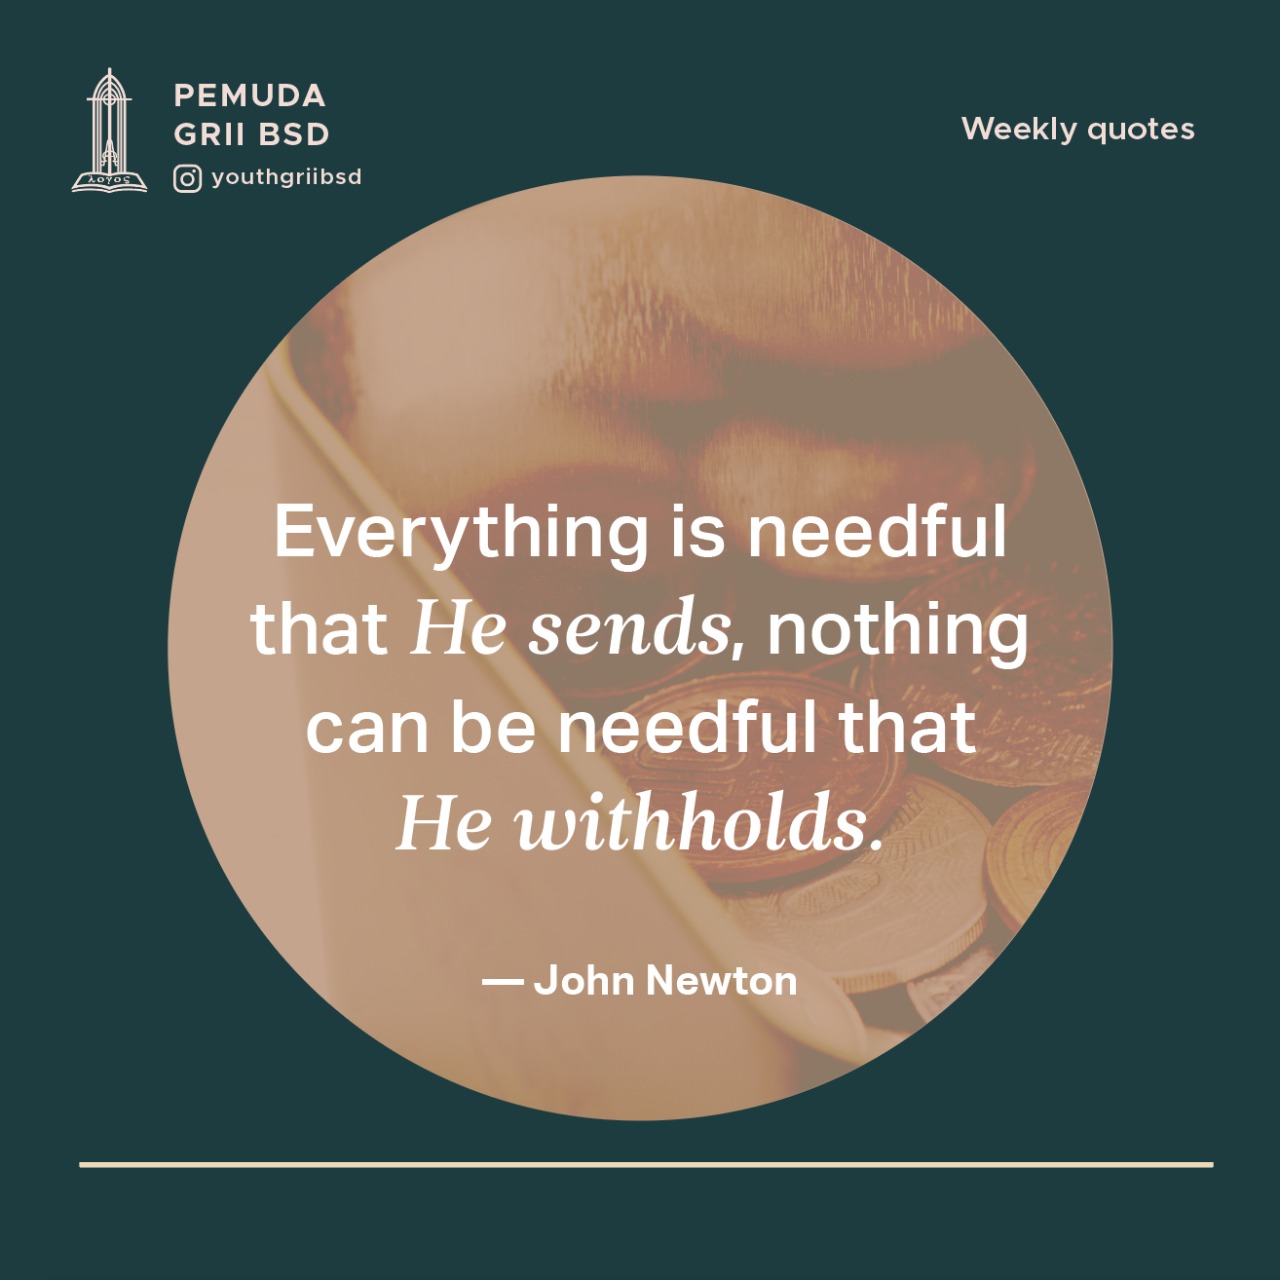 Everything is needful that He sends, nothing can be needful that he withholds.